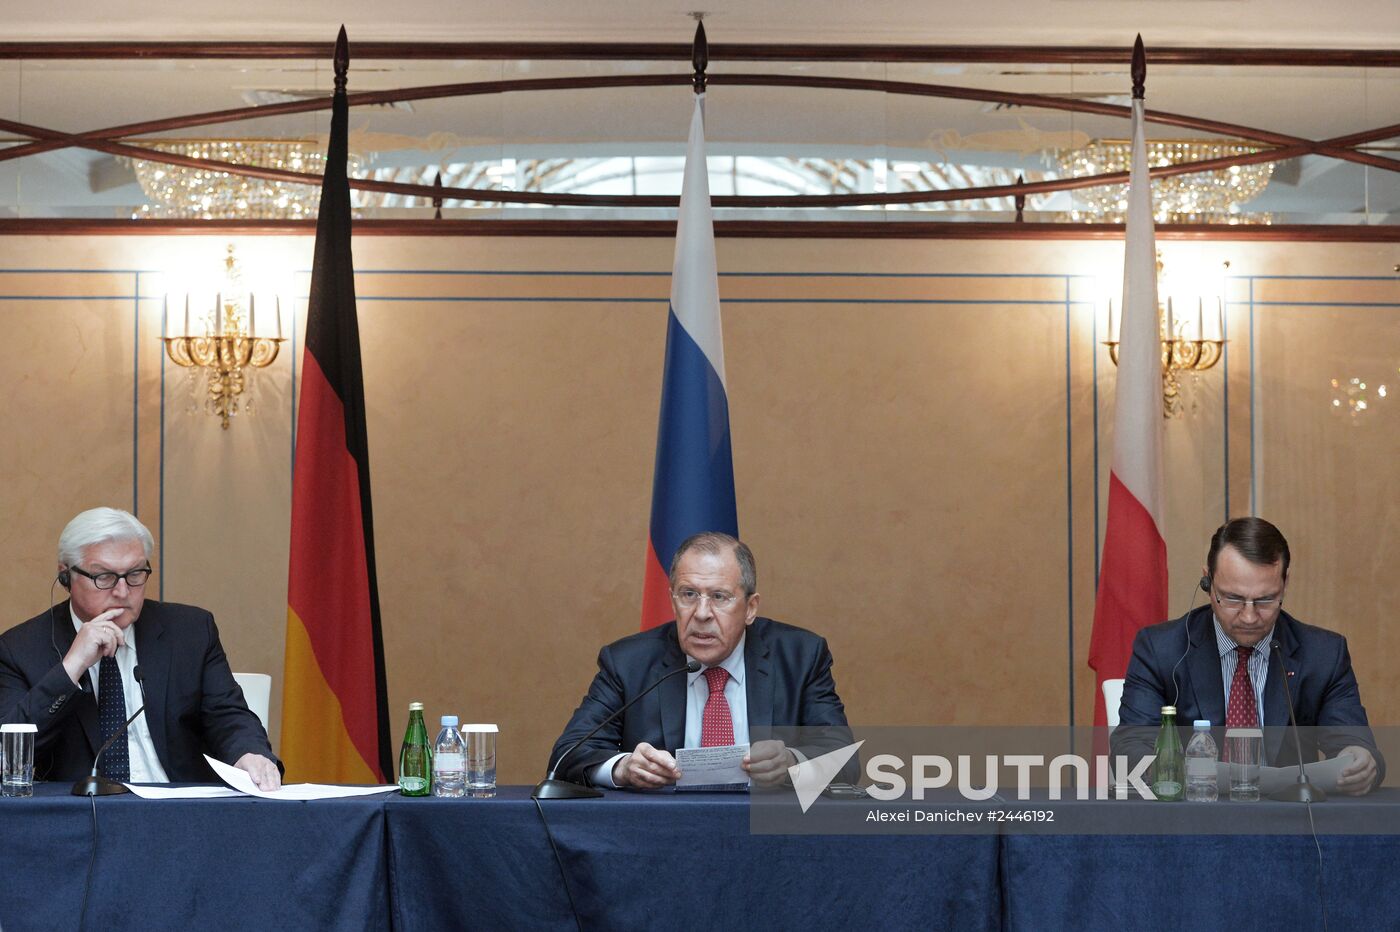 Fourth meeting of foreign ministers of Germany, Poland and Russia